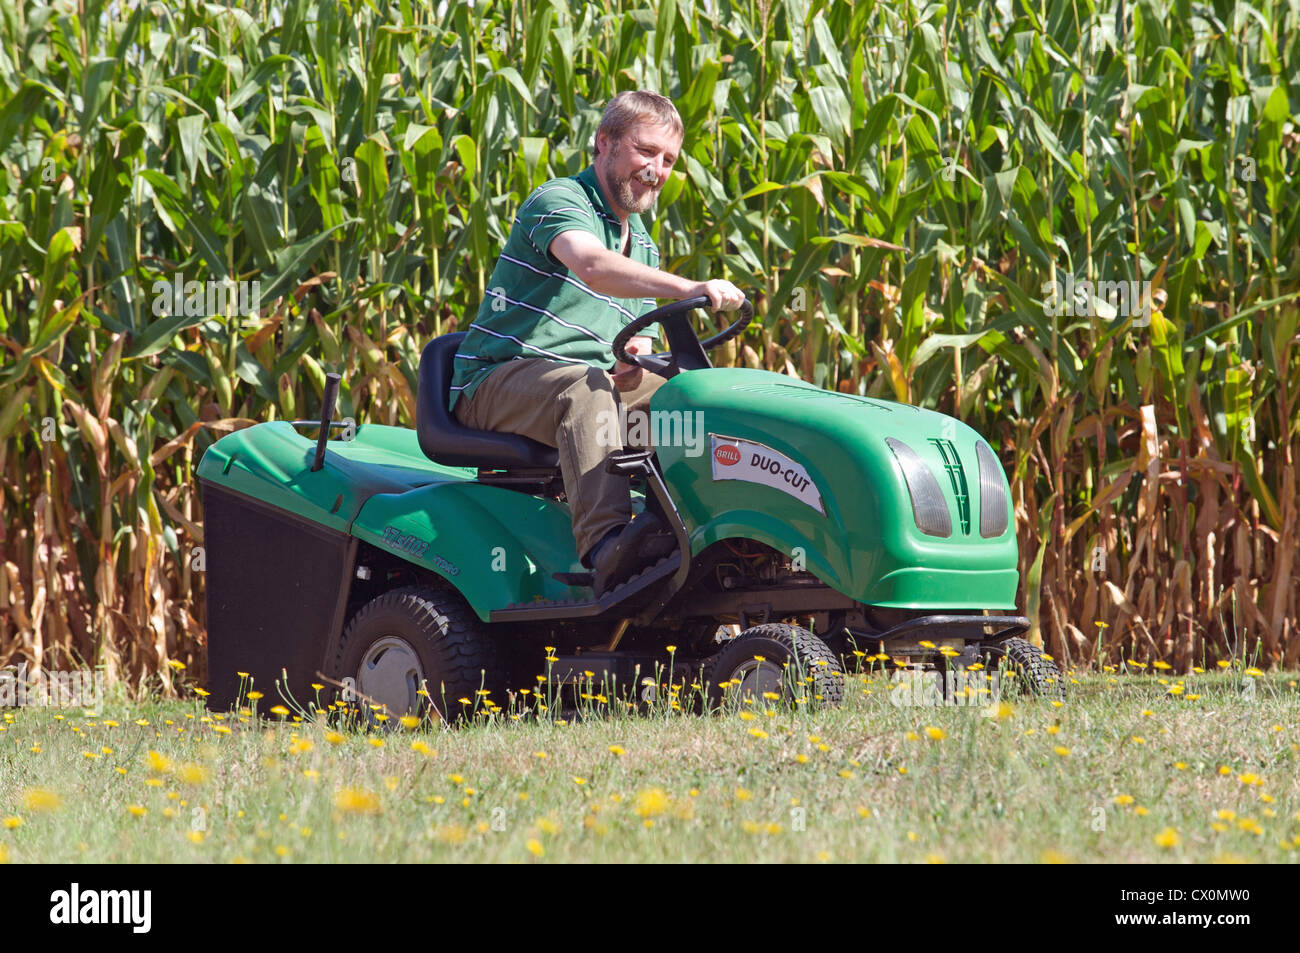 Man cutting lawn with ride-on lawnmower beside maize field Stock Photo